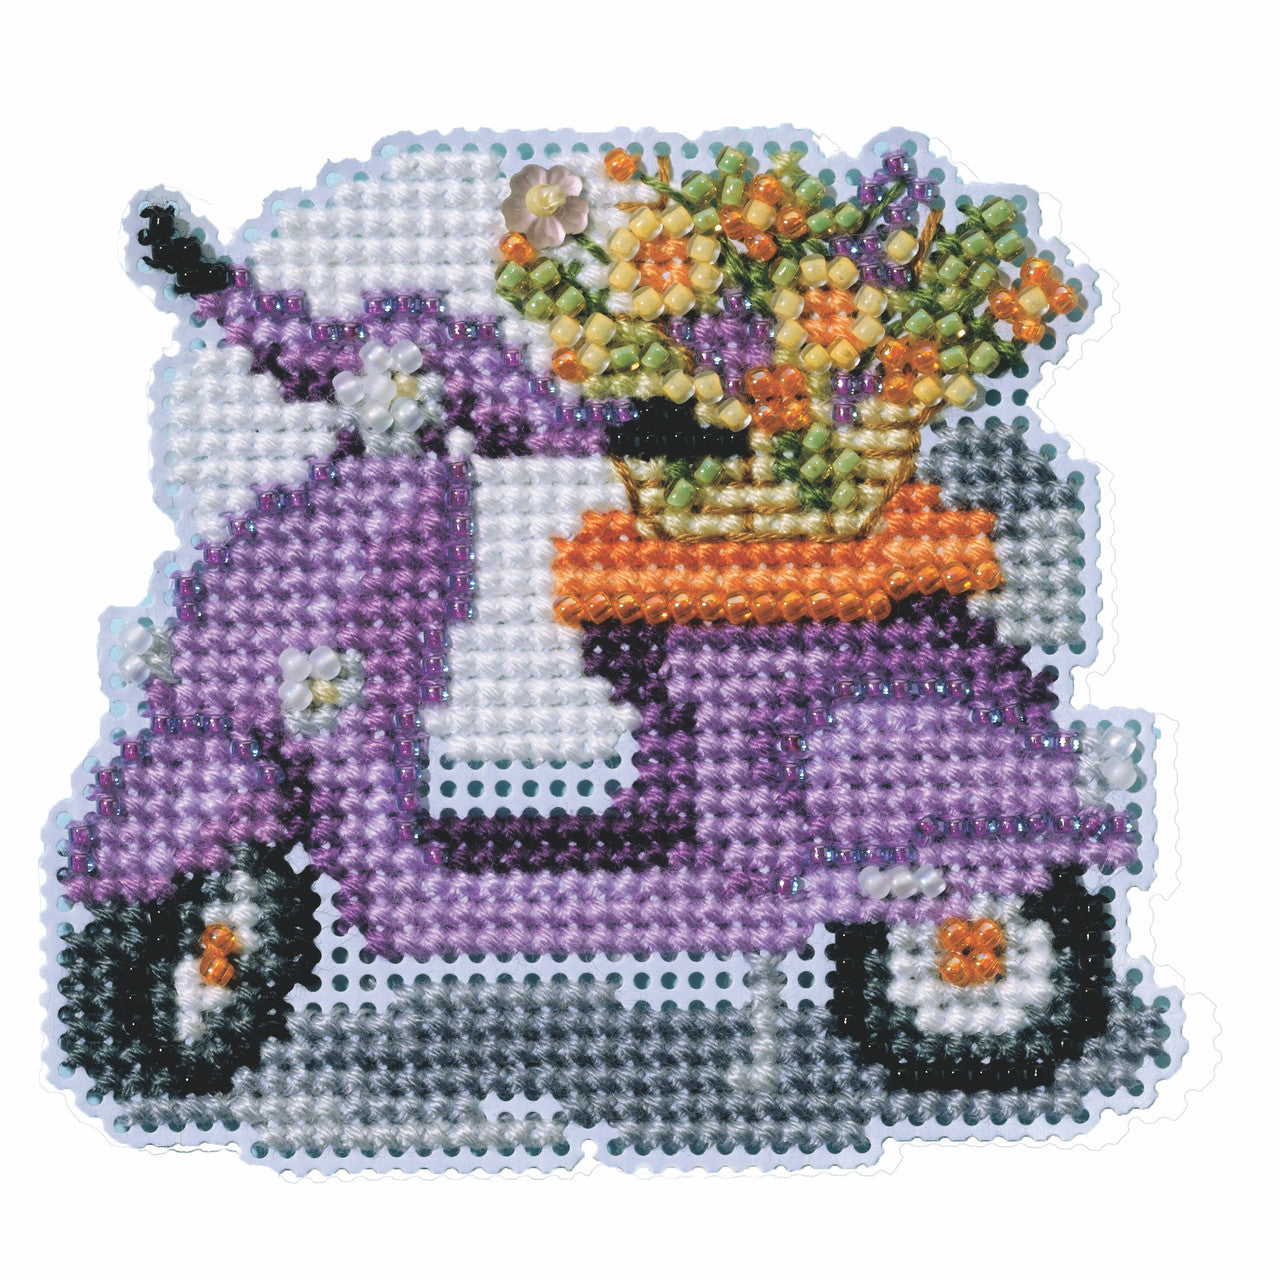 Spring Bouquet - Scooter counted cross stitch kit